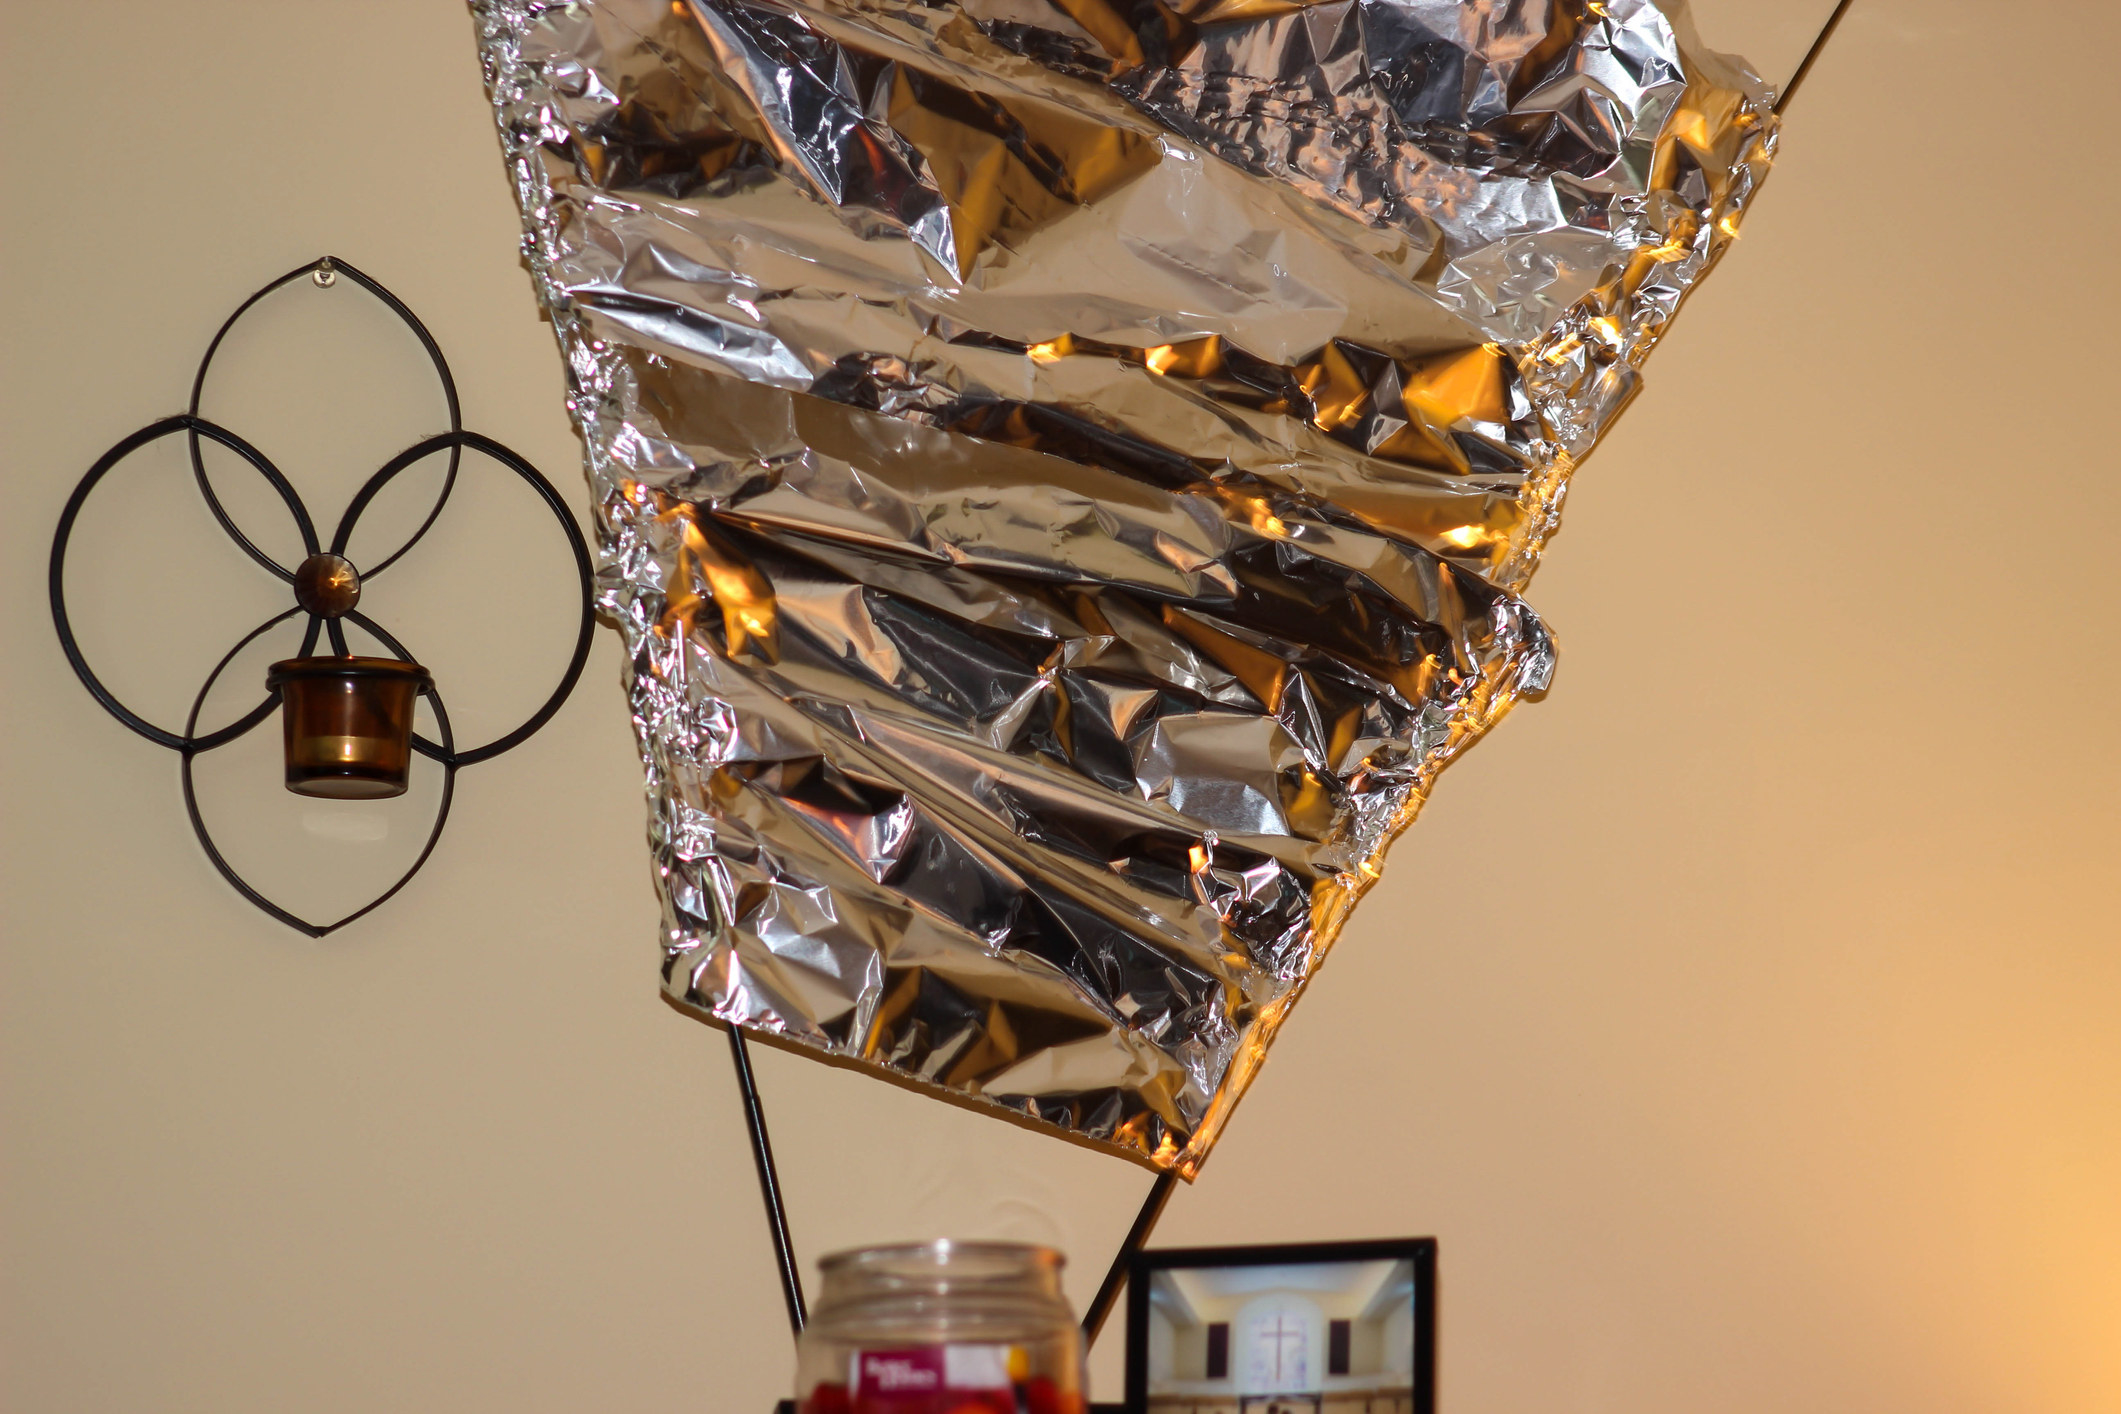 Indoor television antenna with aluminum foil wrapped on it